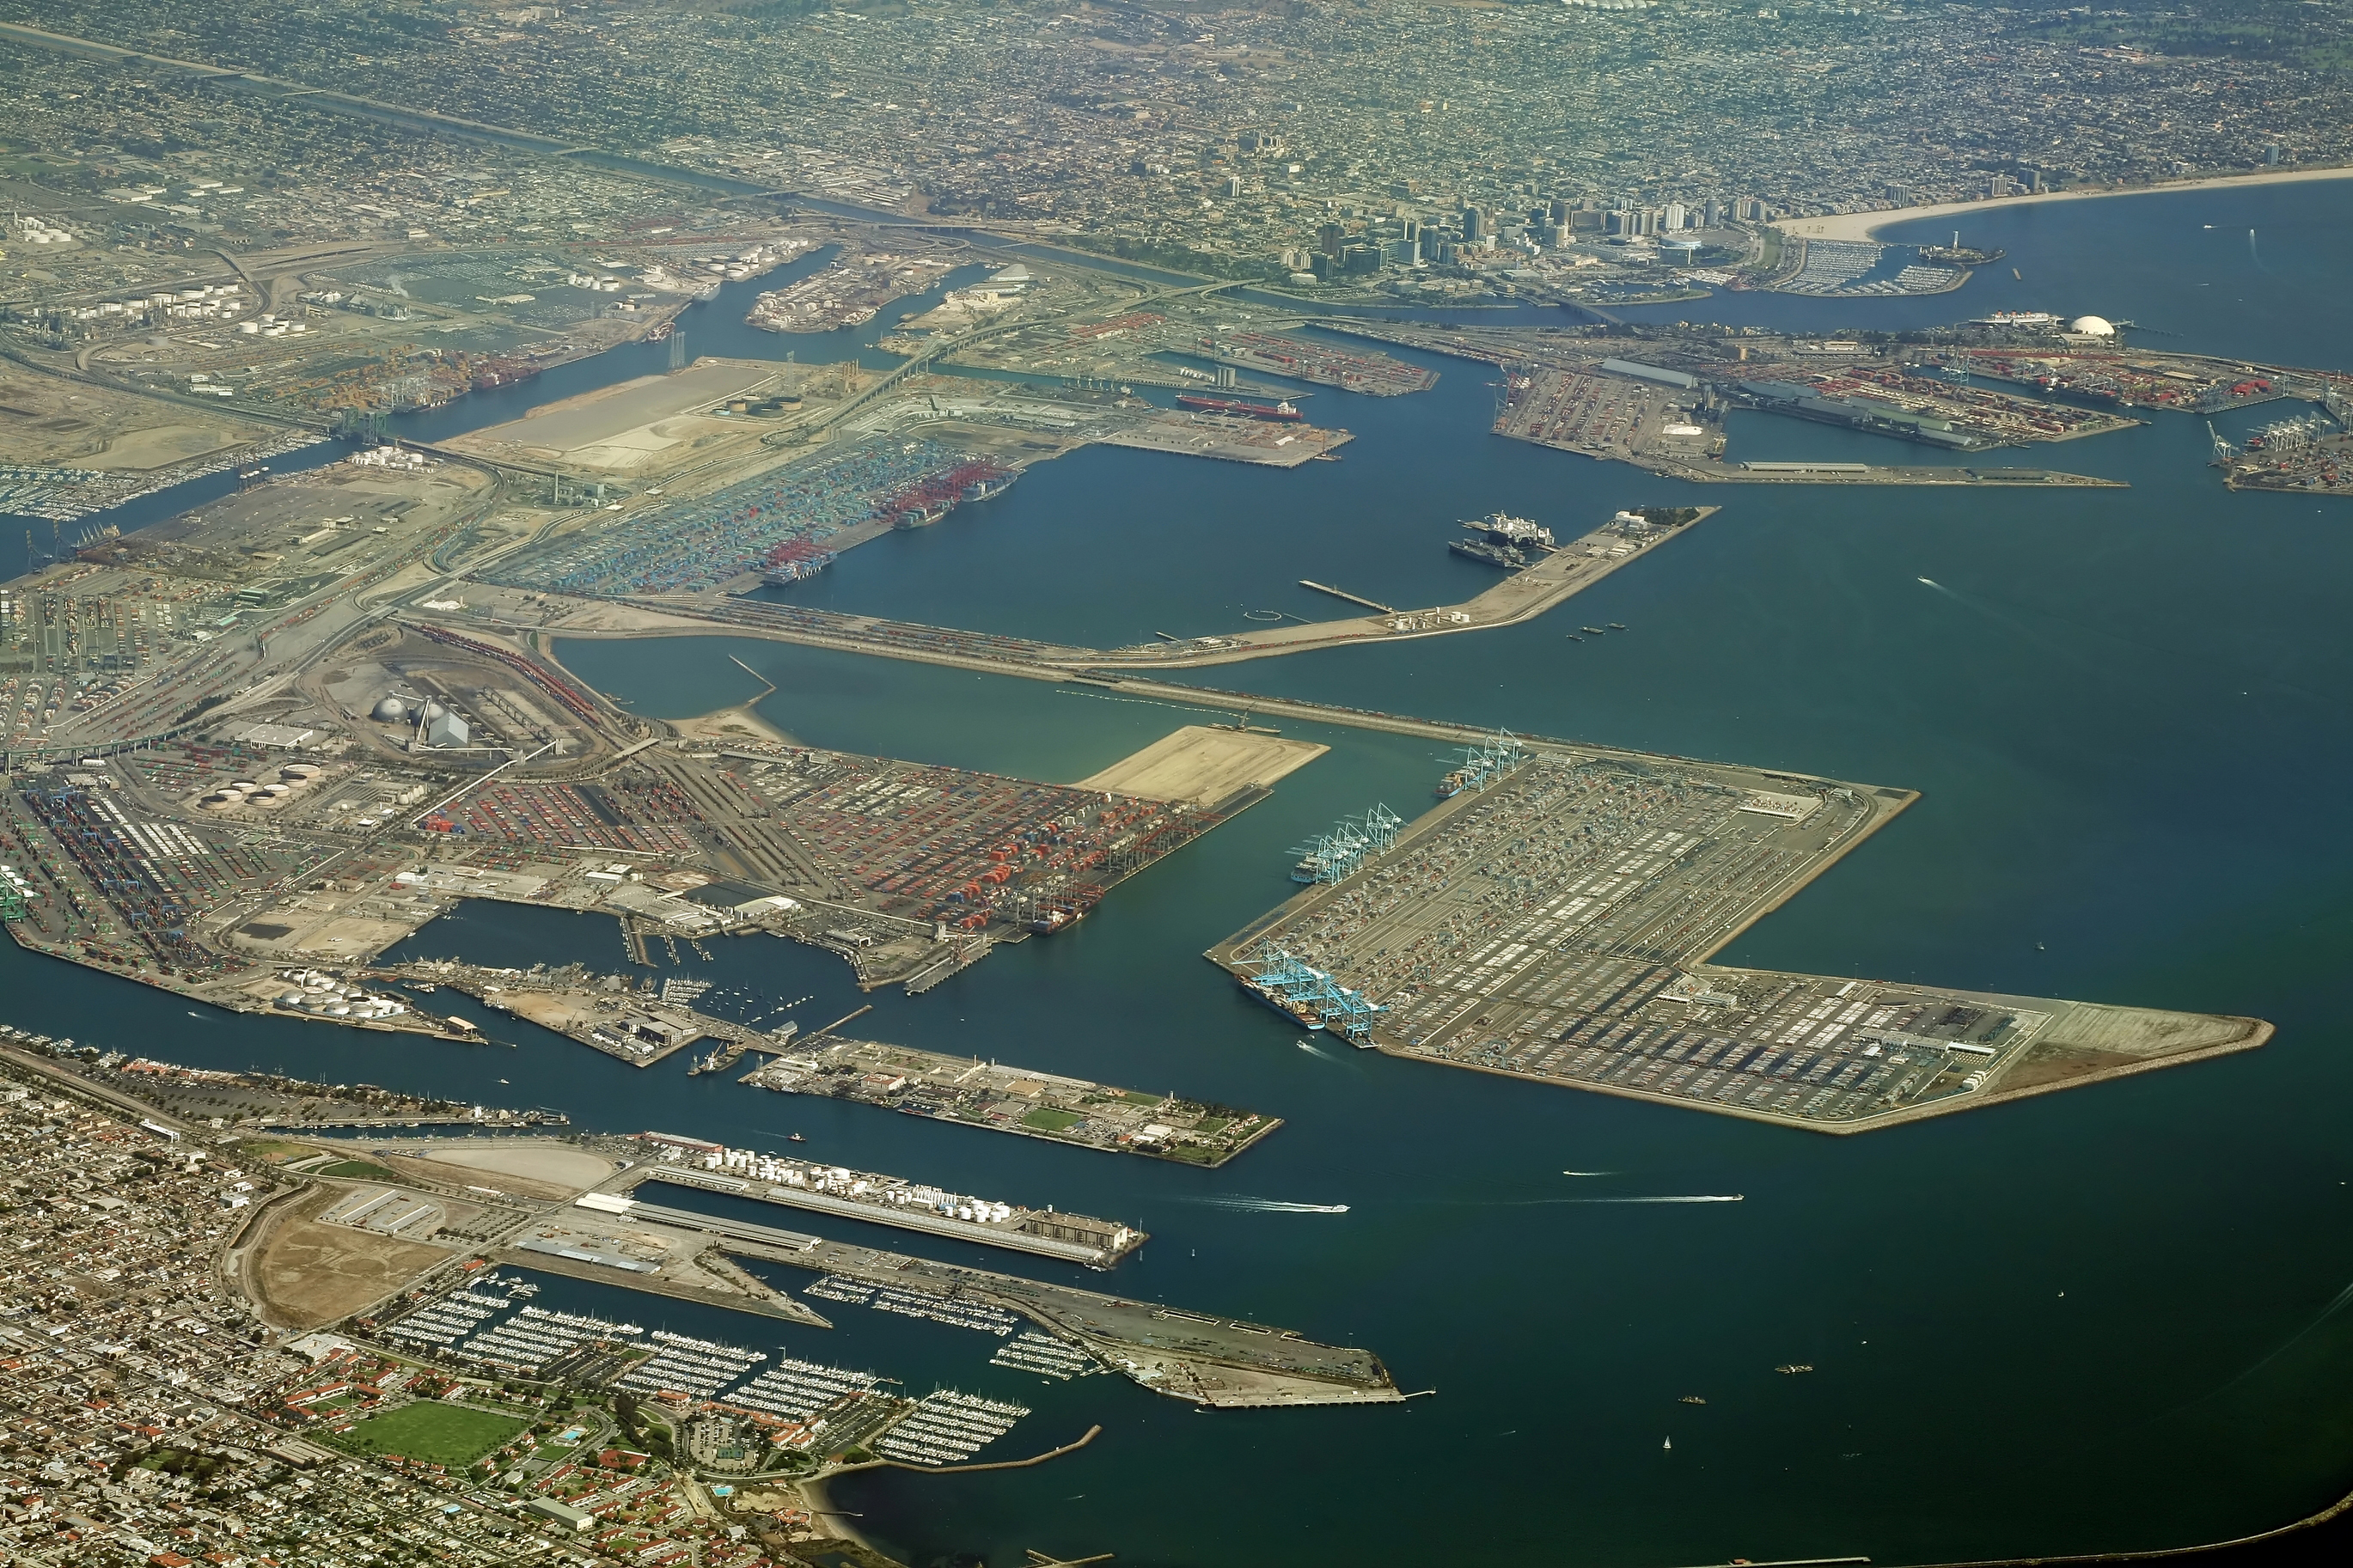 Aerial view of Los Angeles and Long Beach ports